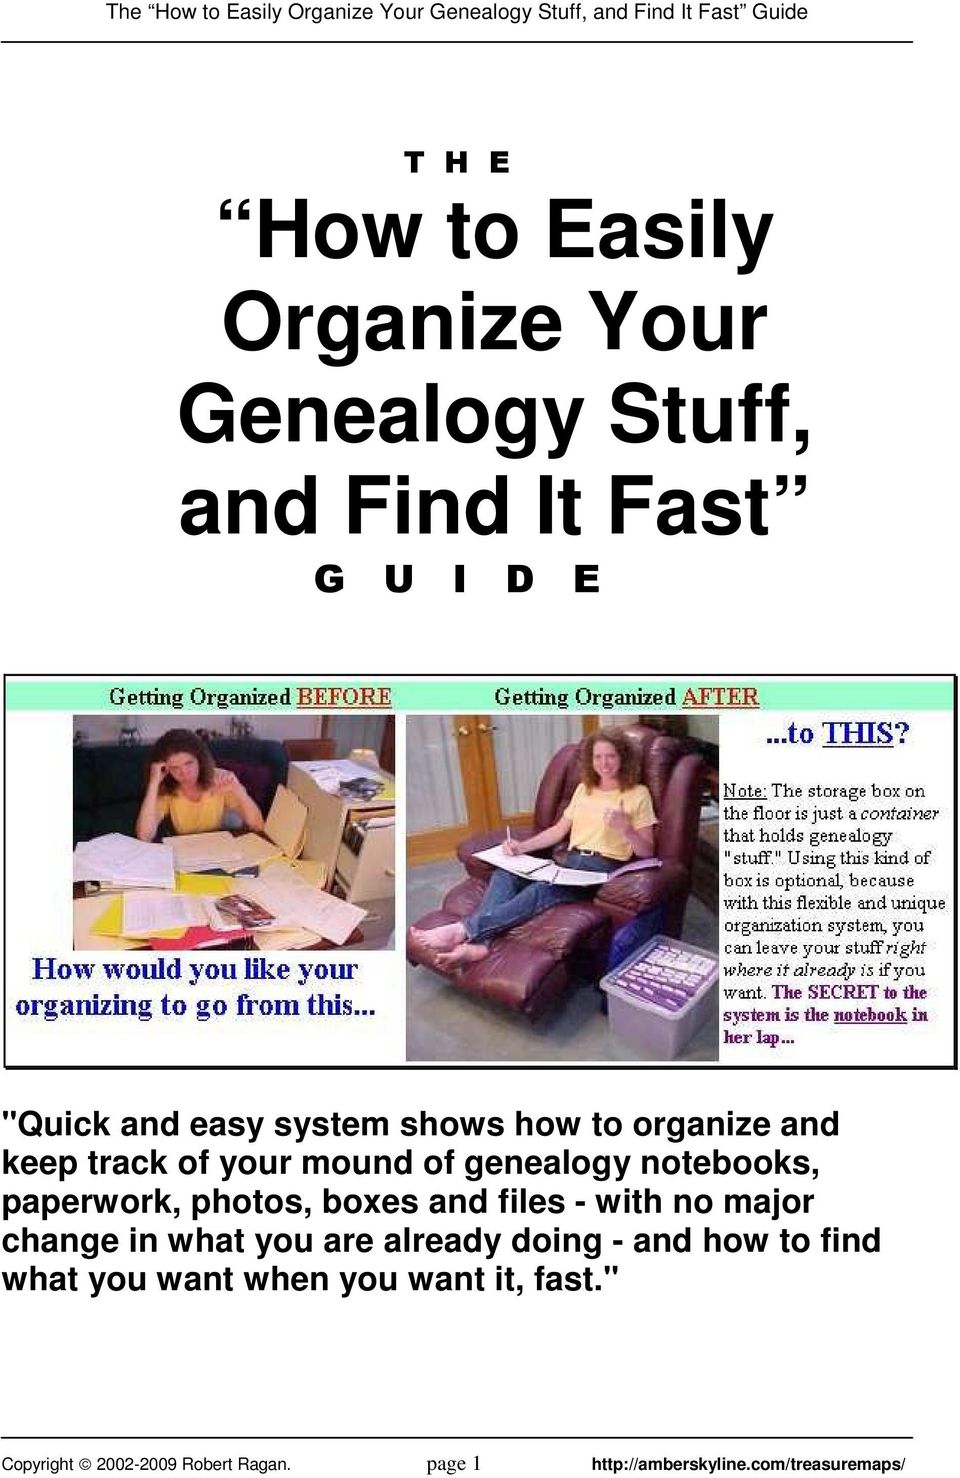 genealogy notebooks, paperwork, photos, boxes and files - with no major change in